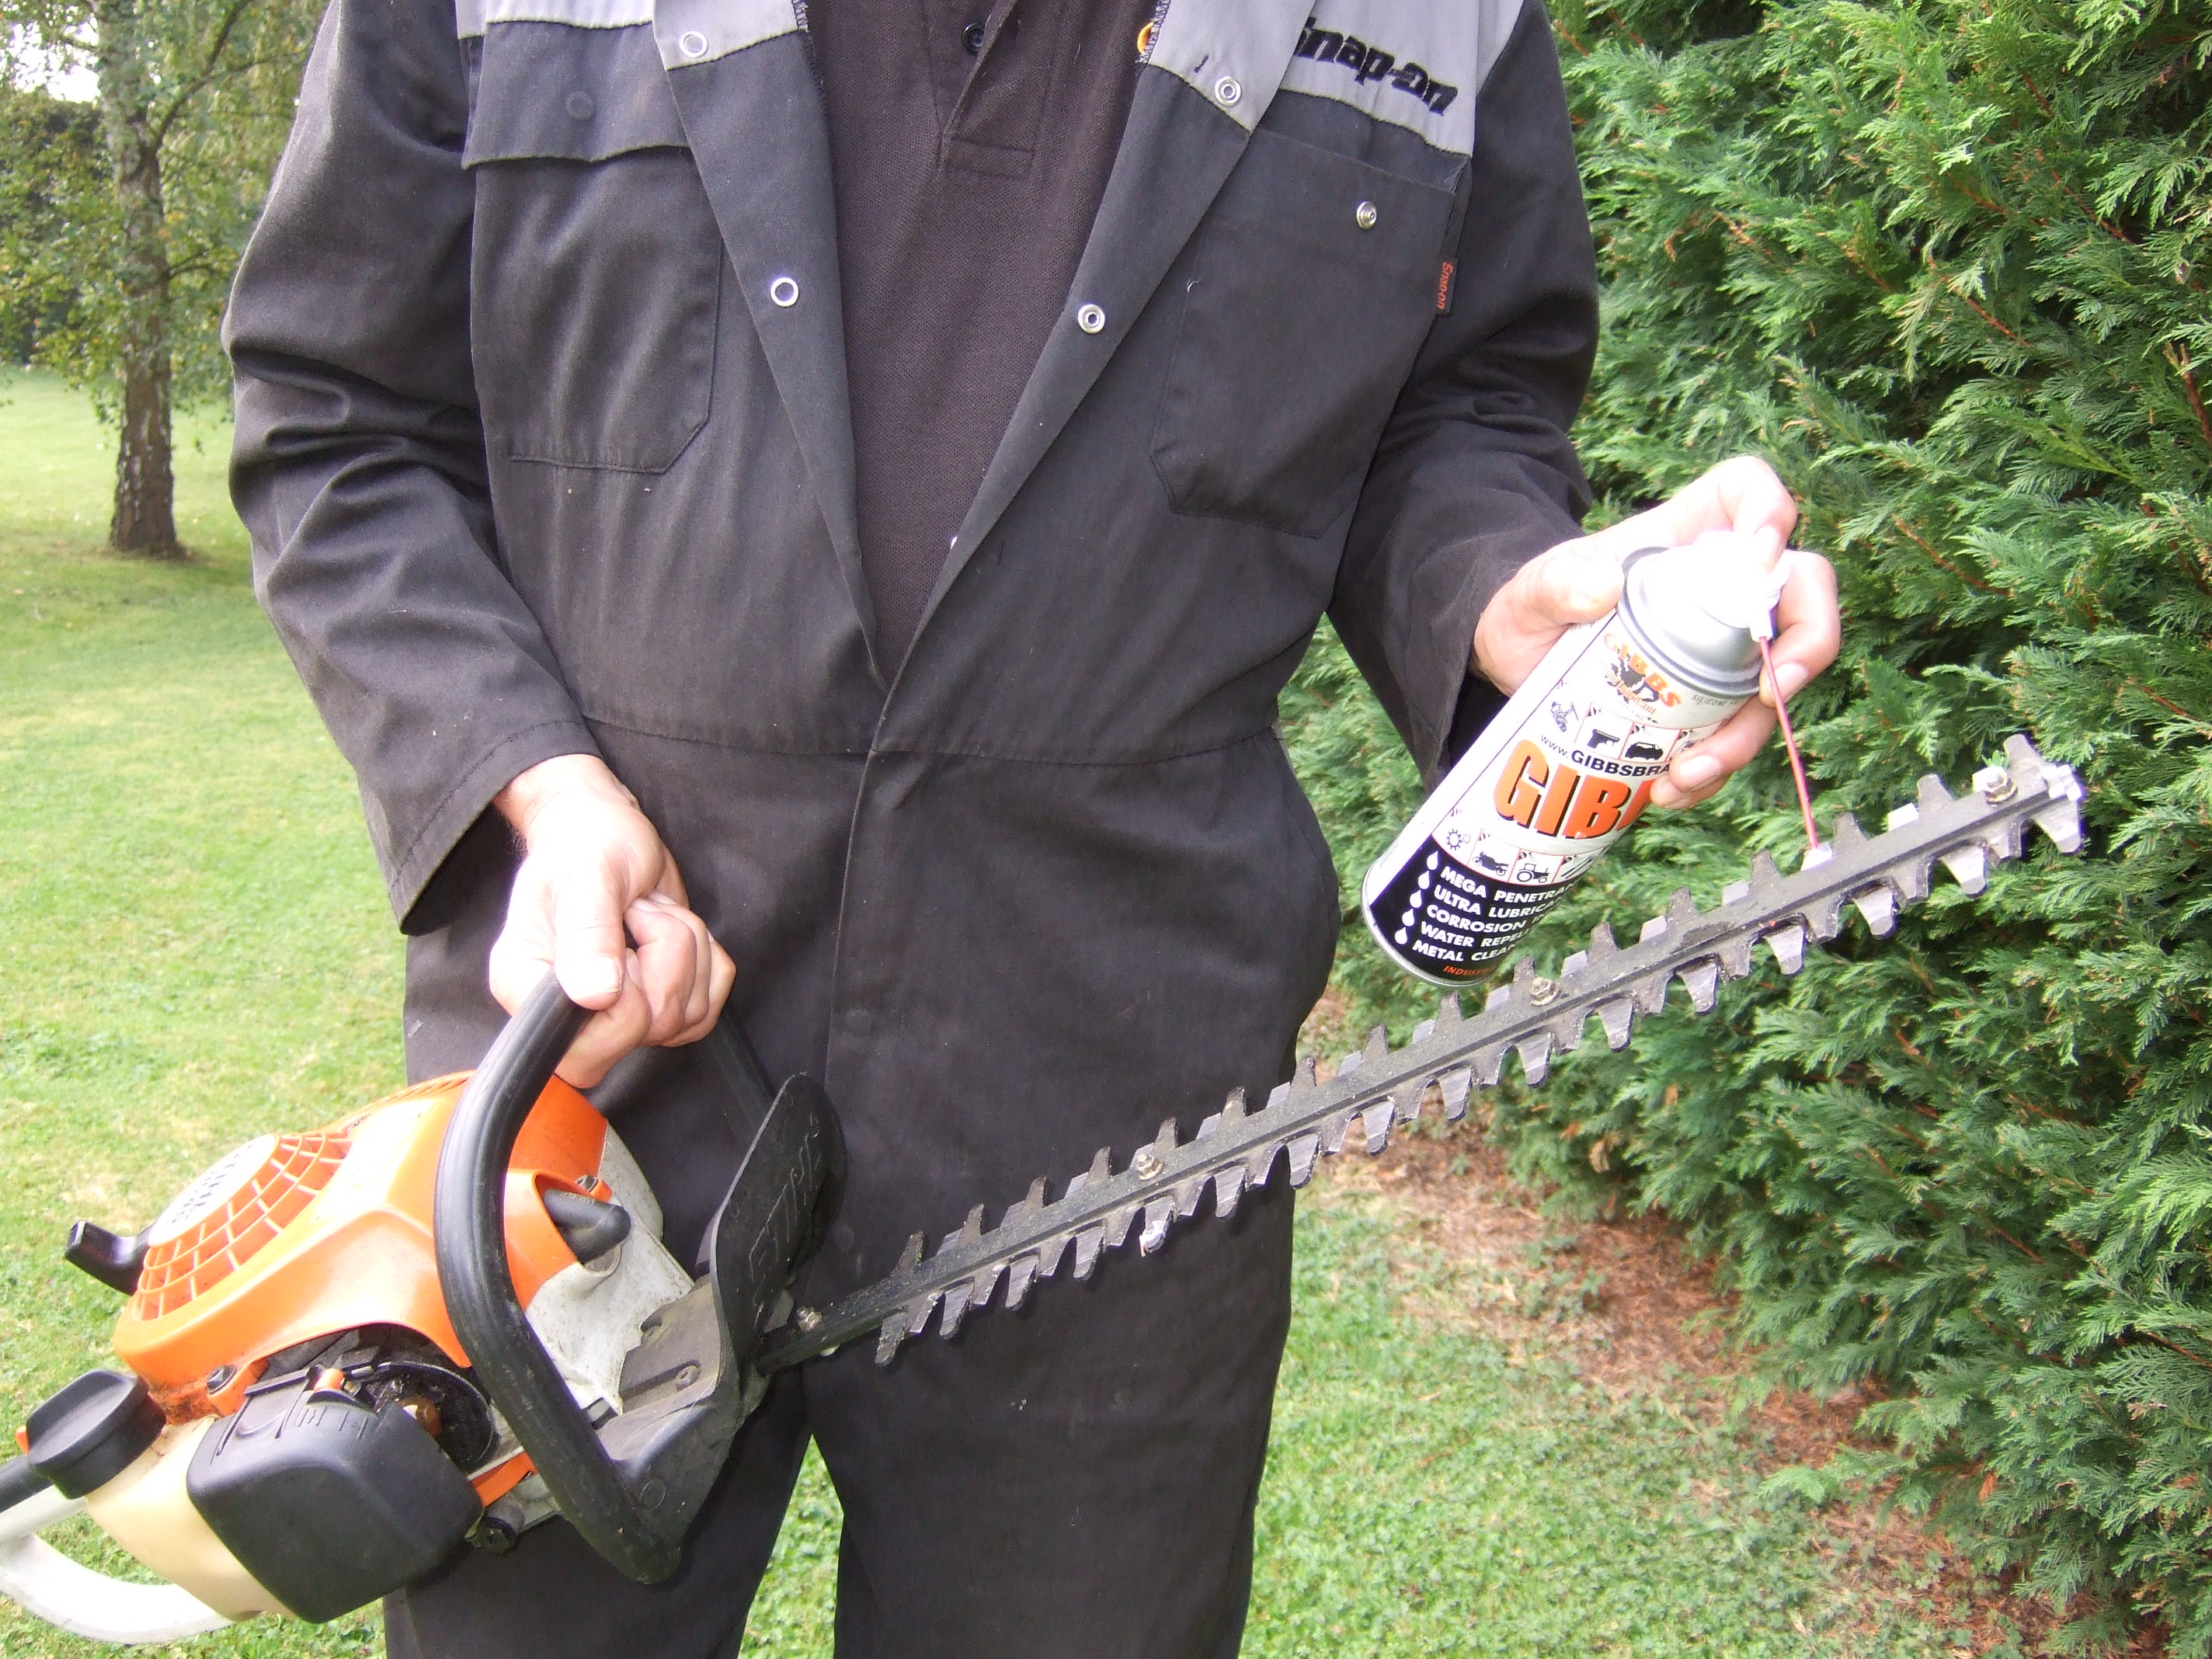 HEDGE CUTTING SEASON! Clean and lubricate your hedge trimmer with GIBBS Brand. | The Gibbs Brand Blog